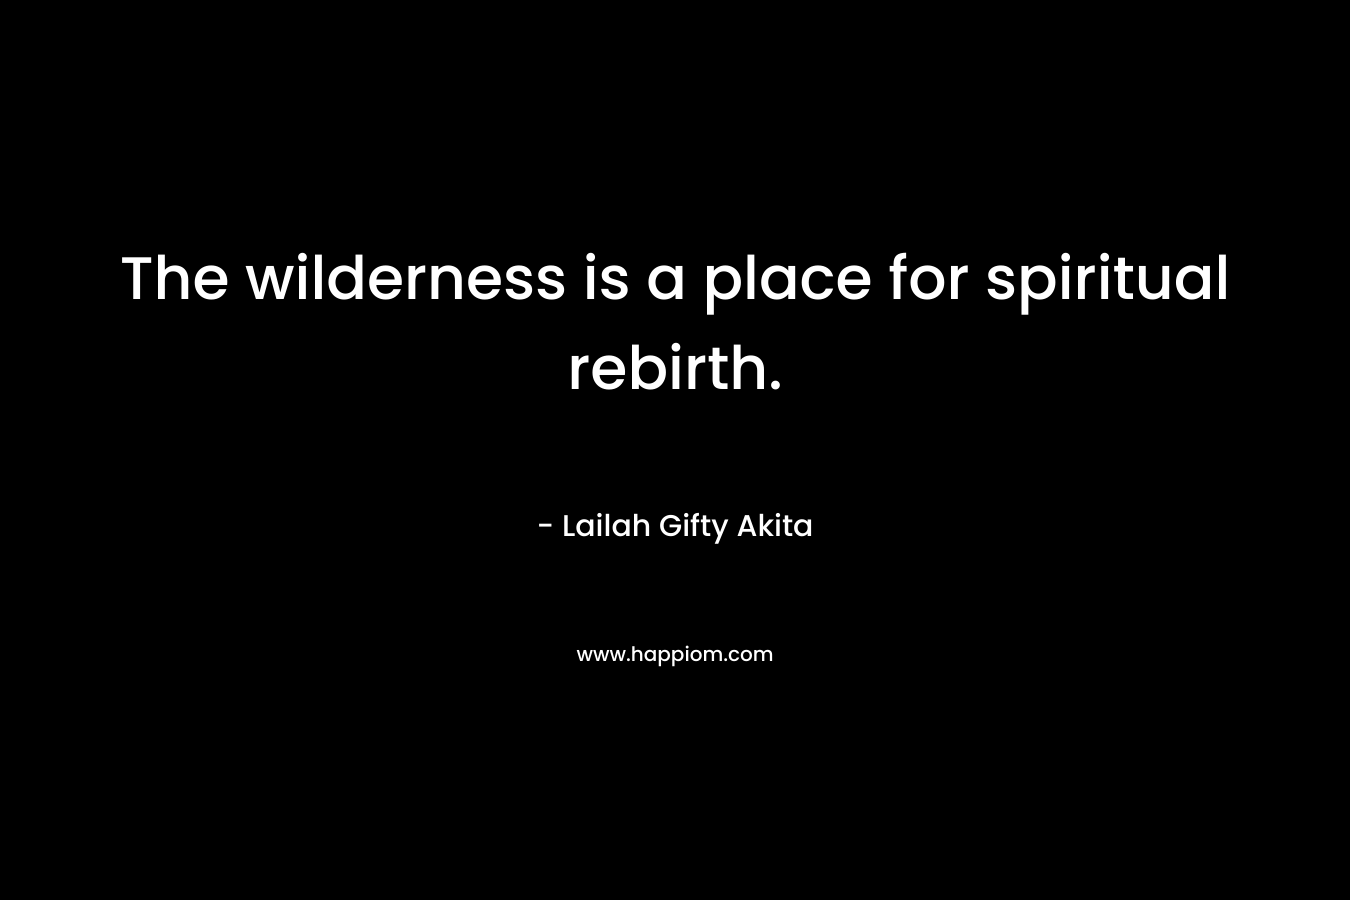 The wilderness is a place for spiritual rebirth. – Lailah Gifty Akita